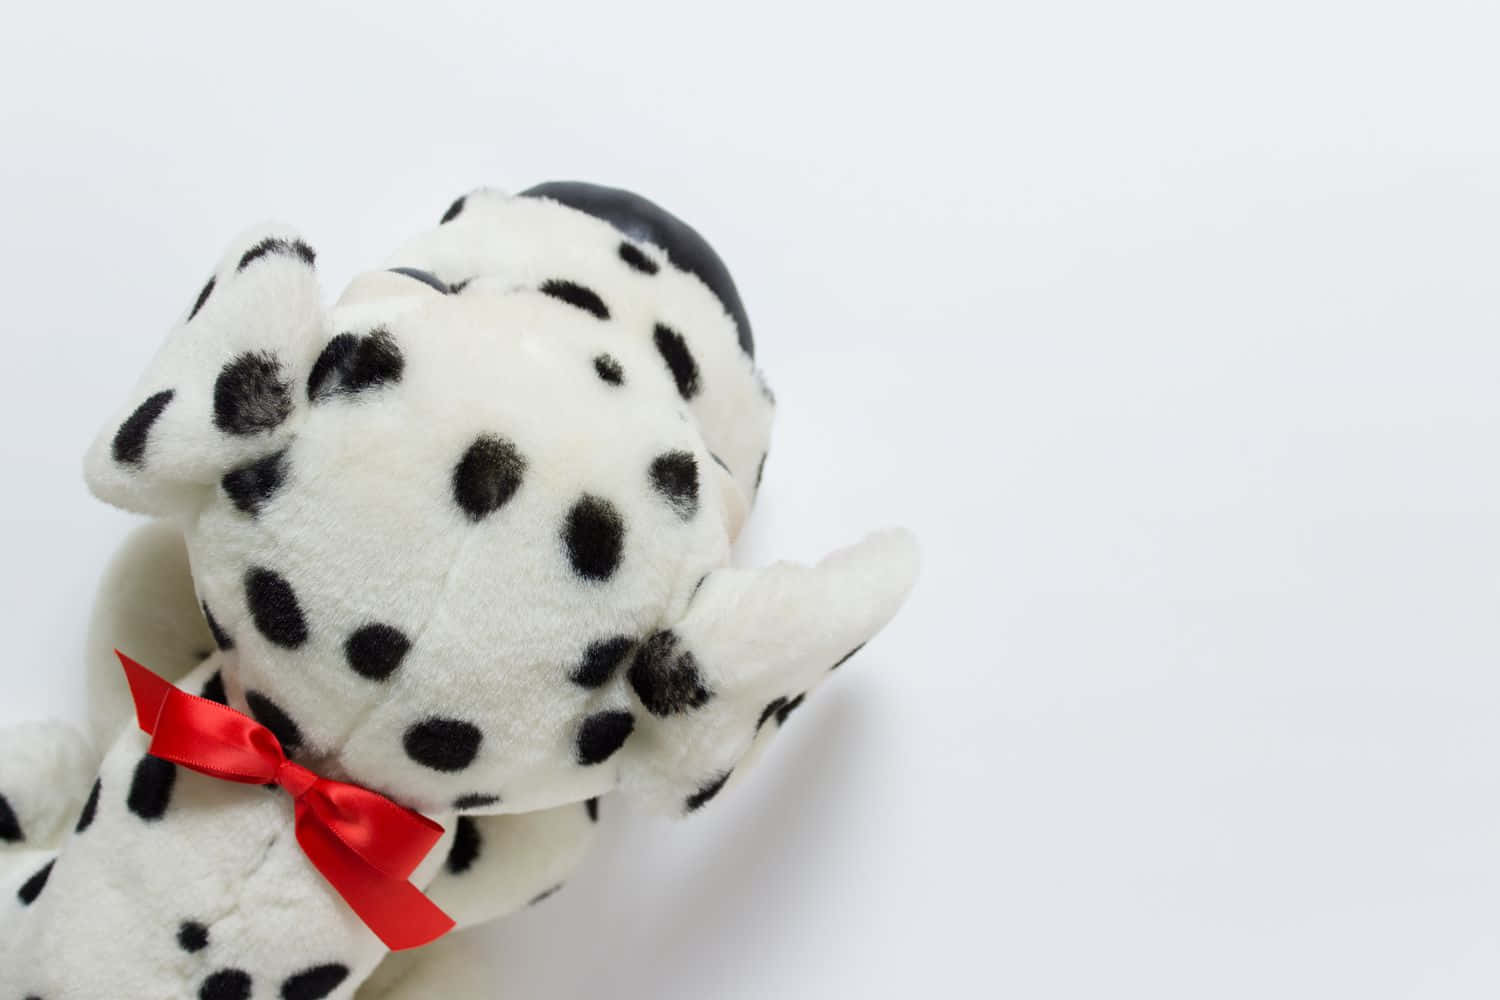 A Stuffed Dalmatian Dog With A Red Bow